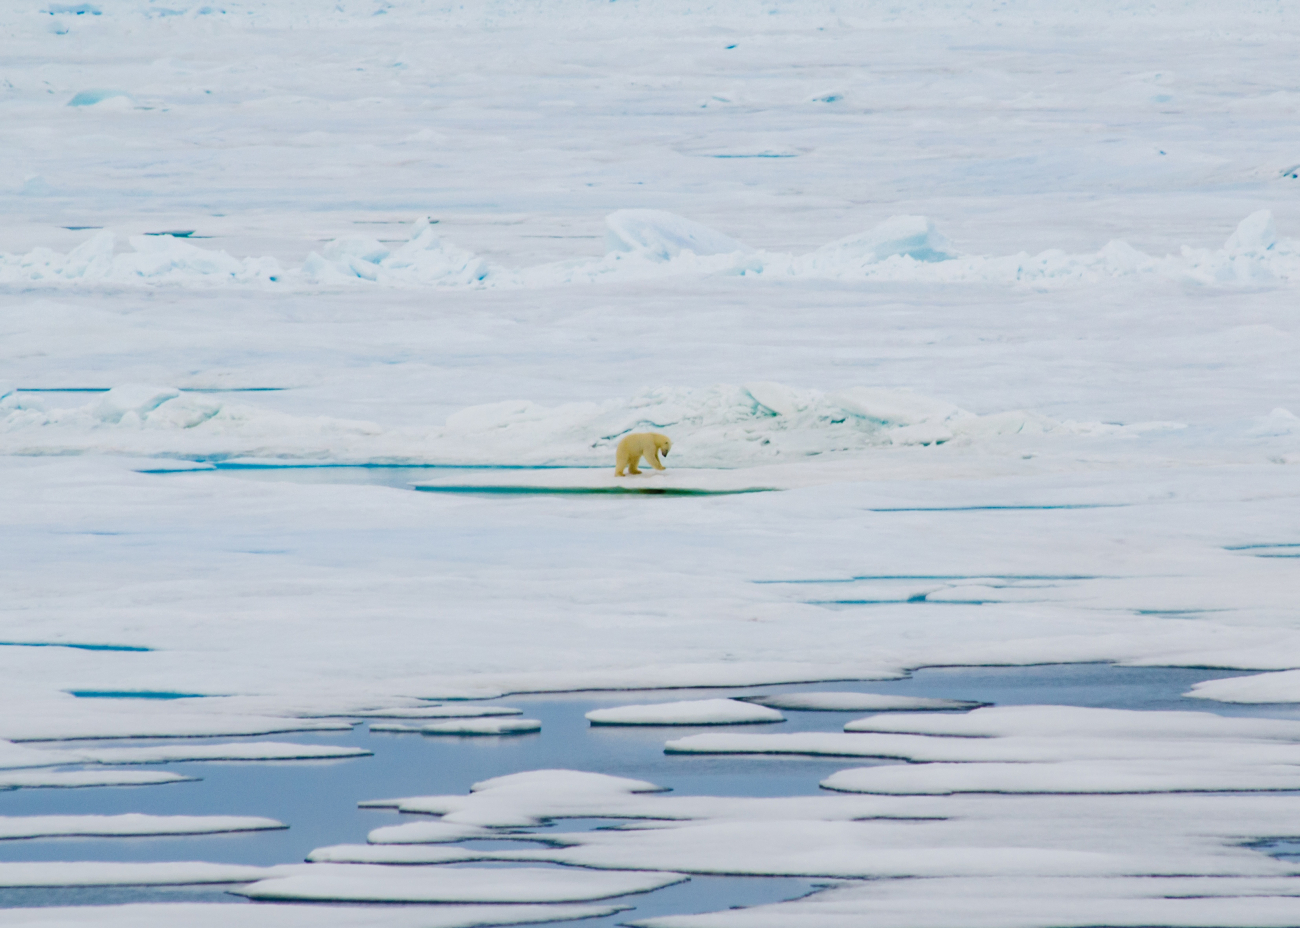 This polar bear was pounding on a seal den, hoping to find food in the openArctic landscape